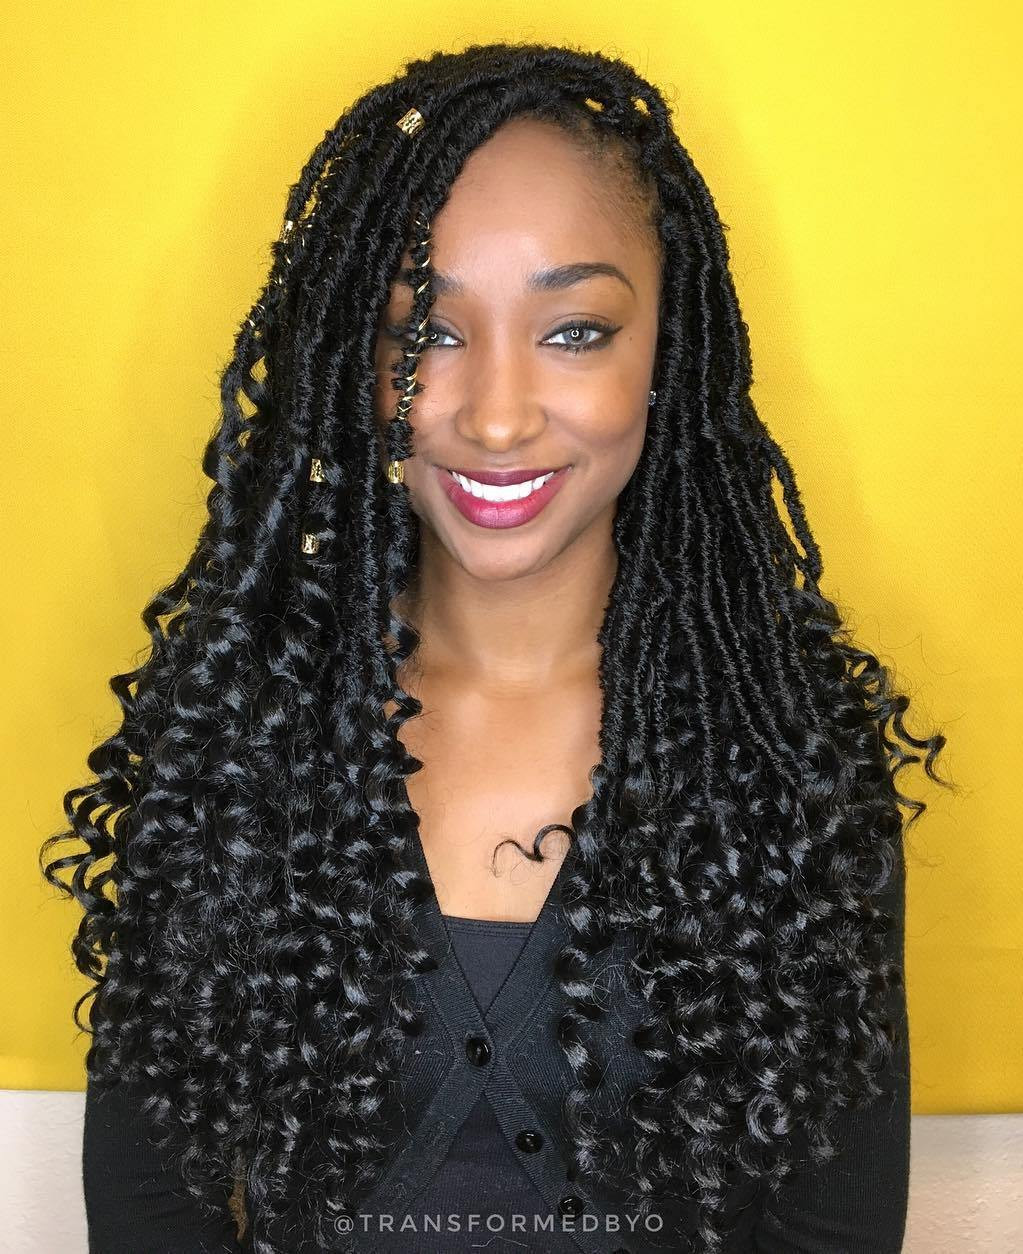 Black Crochet Hairstyles 2020
 45 Classy Natural Hairstyles for Black Girls to Turn Heads